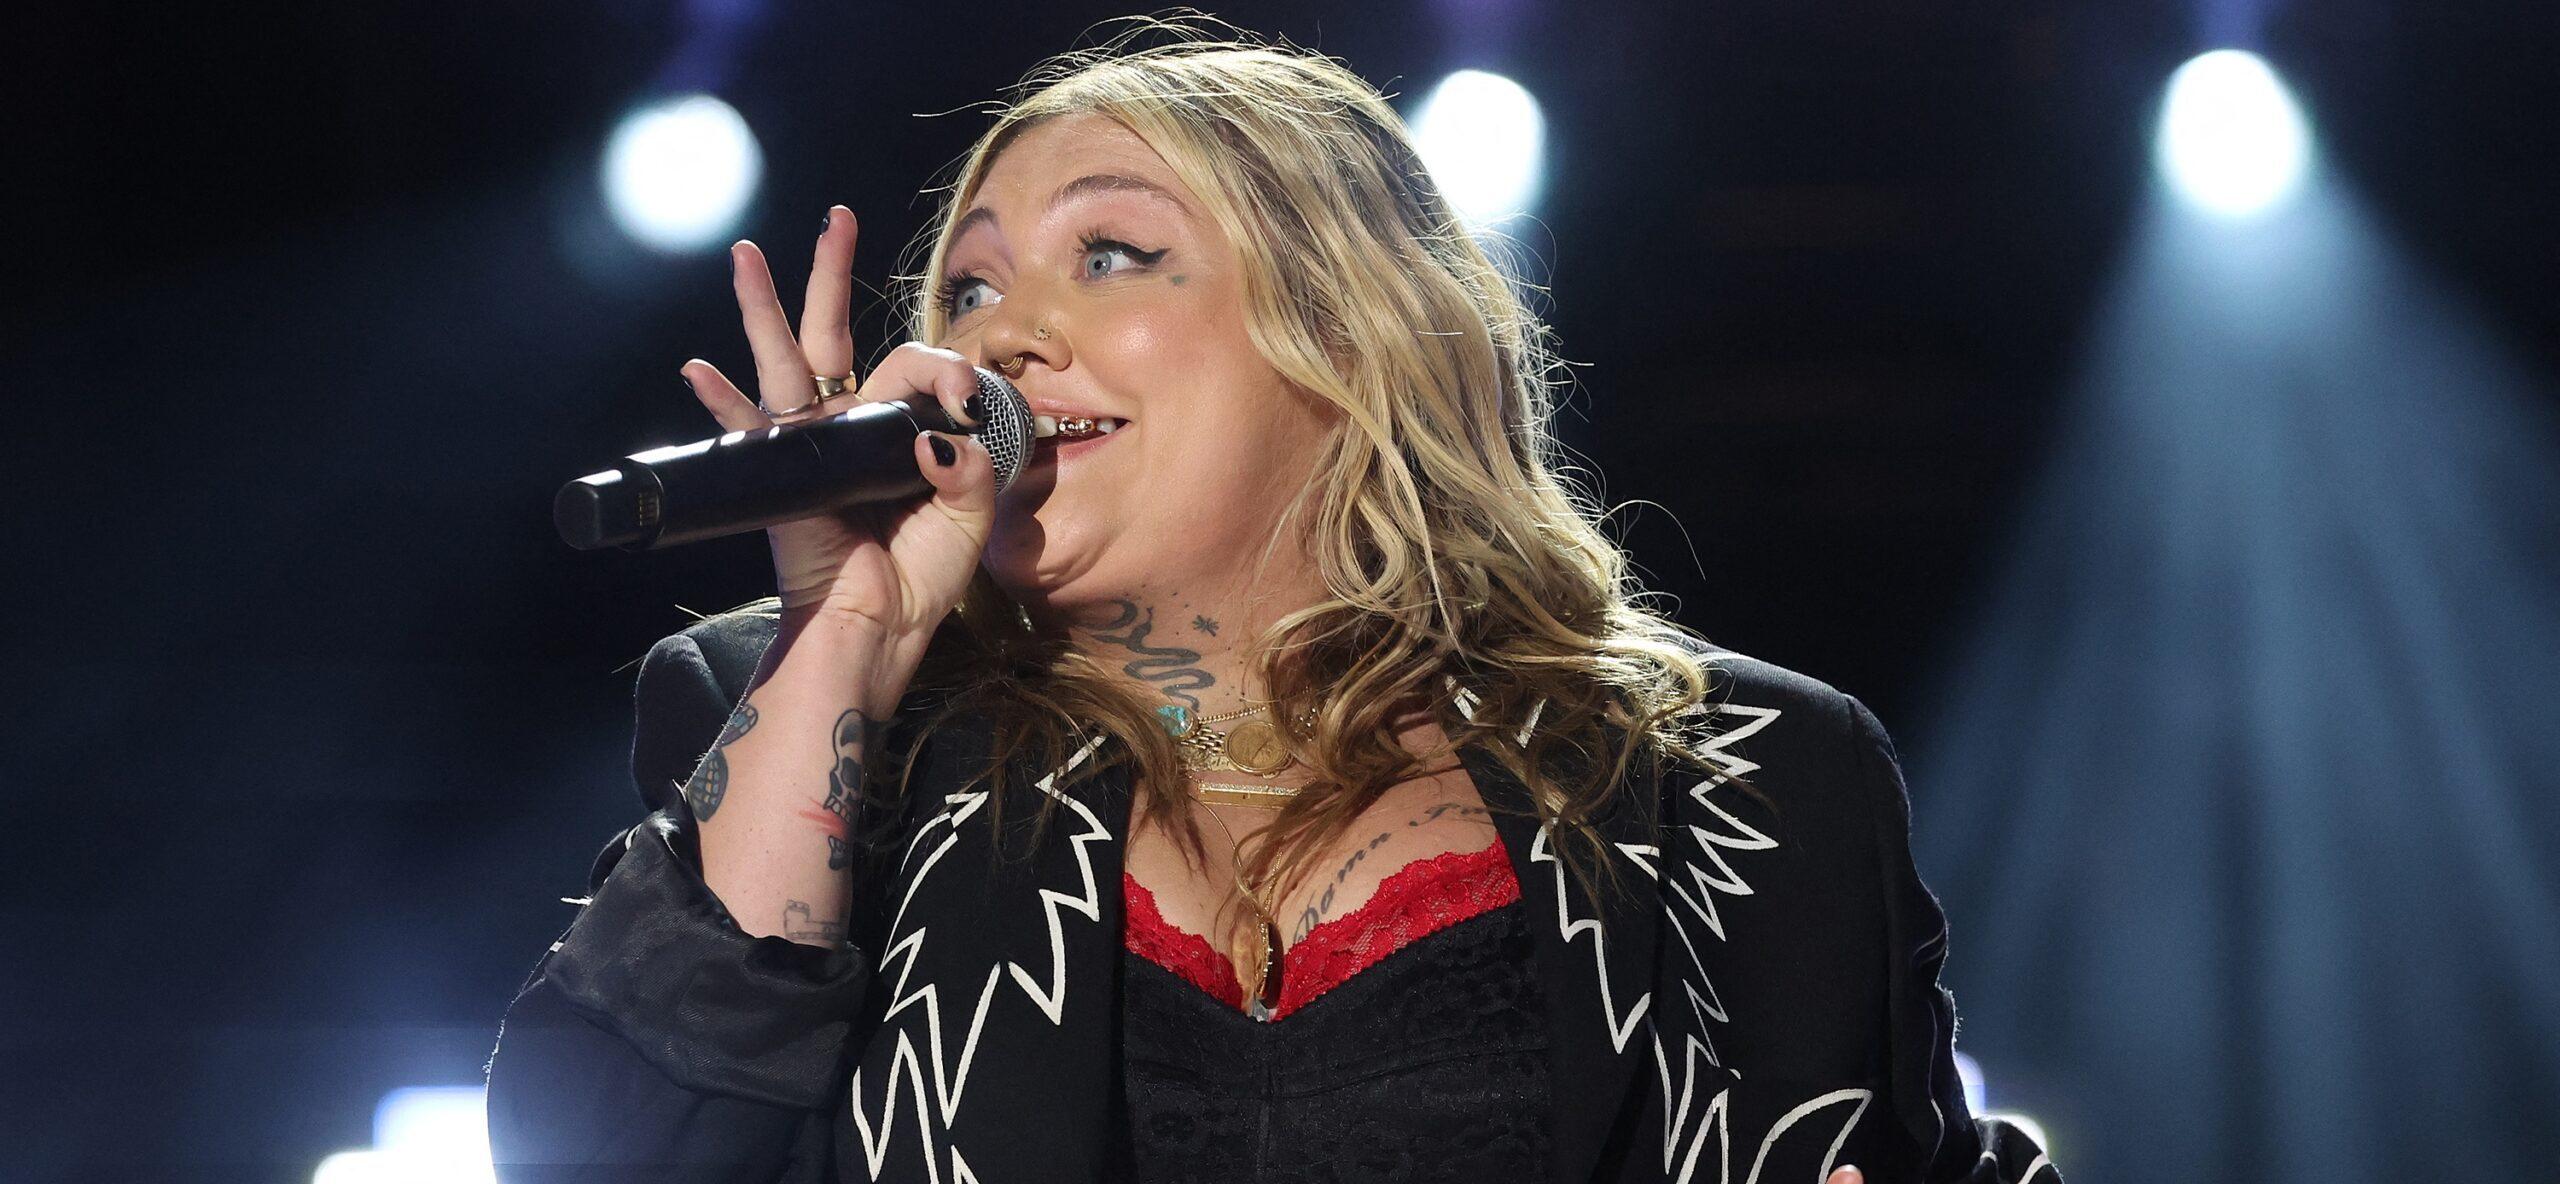 Elle King Performs At Stagecoach Festival Months After Drunk Dolly Parton Stunt